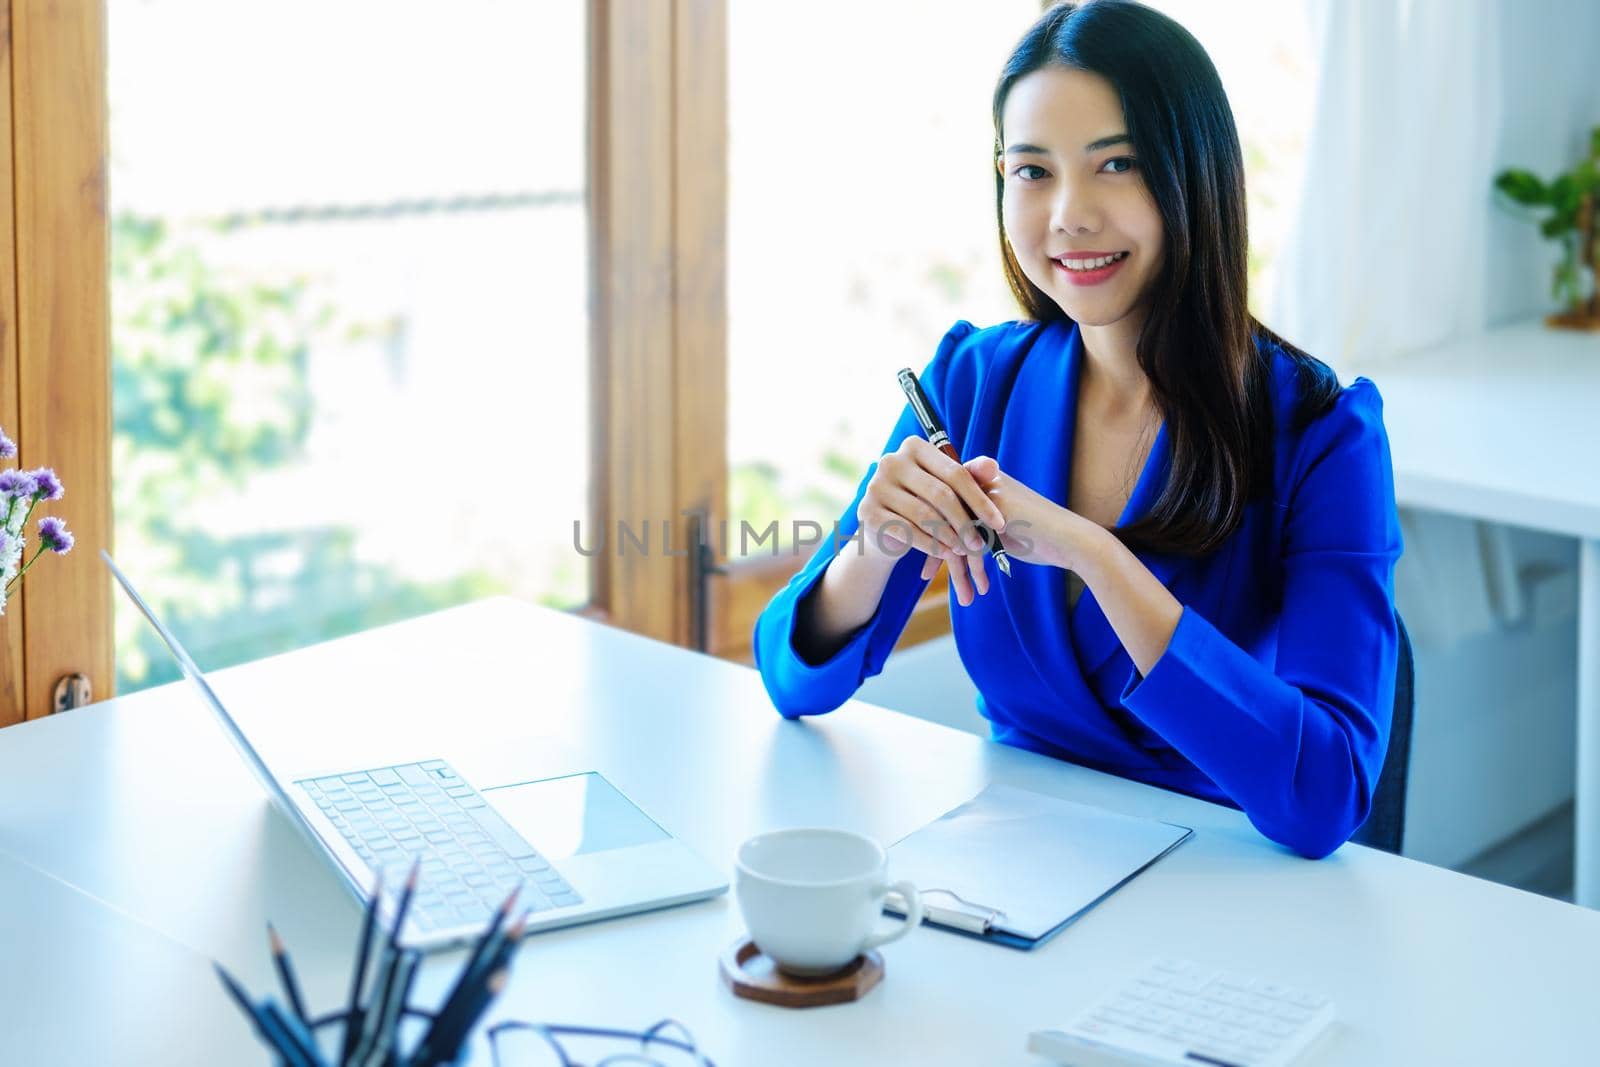 An Asian entrepreneur or businesswoman shows a smiling face while working with using computer on a wooden table. by Manastrong